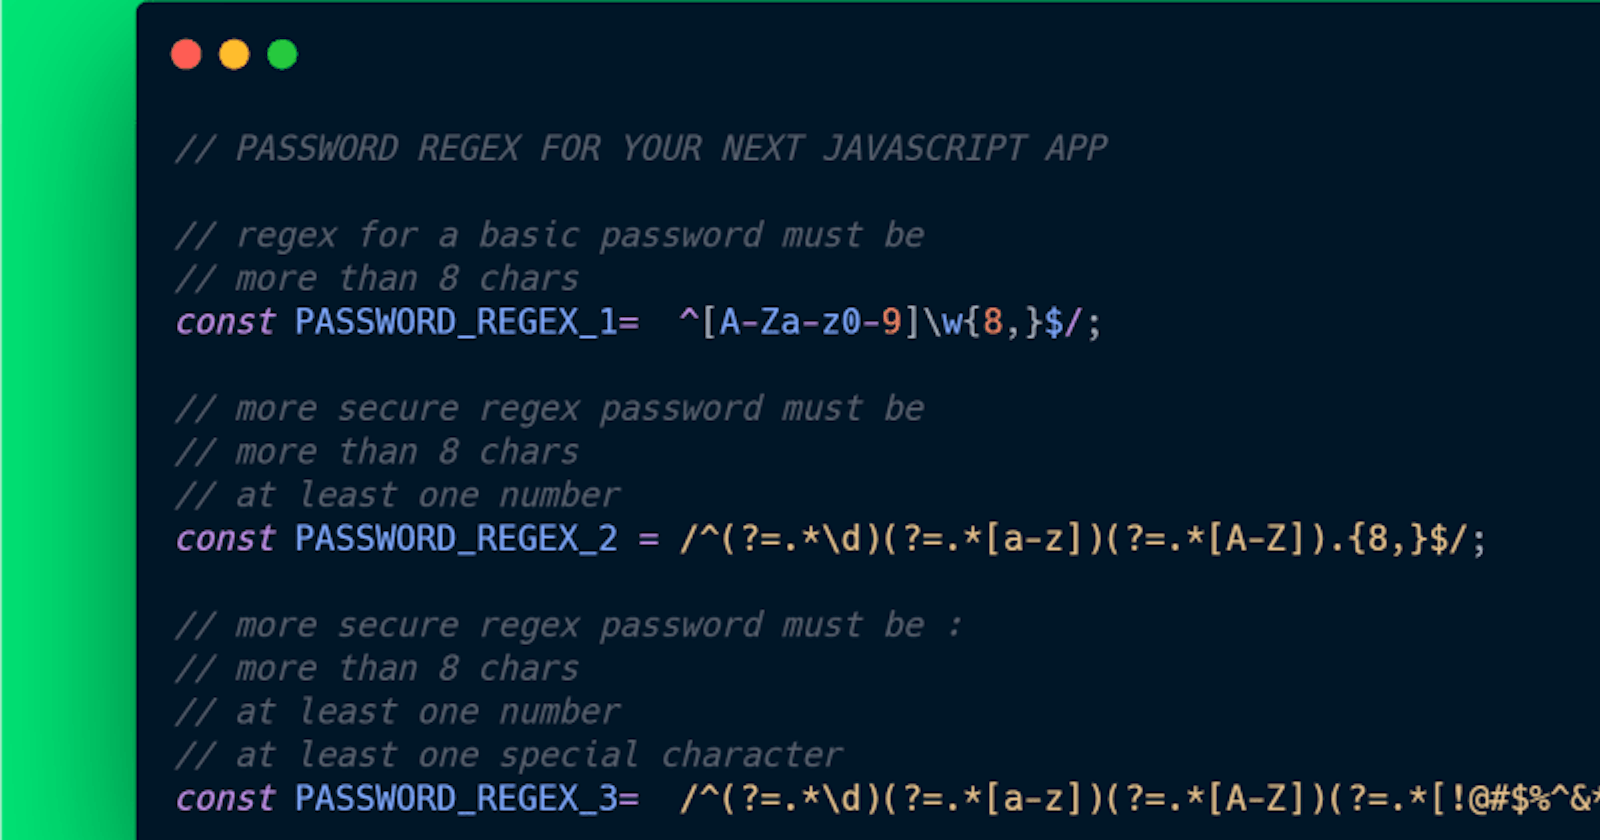 3 password REGEX for your next project